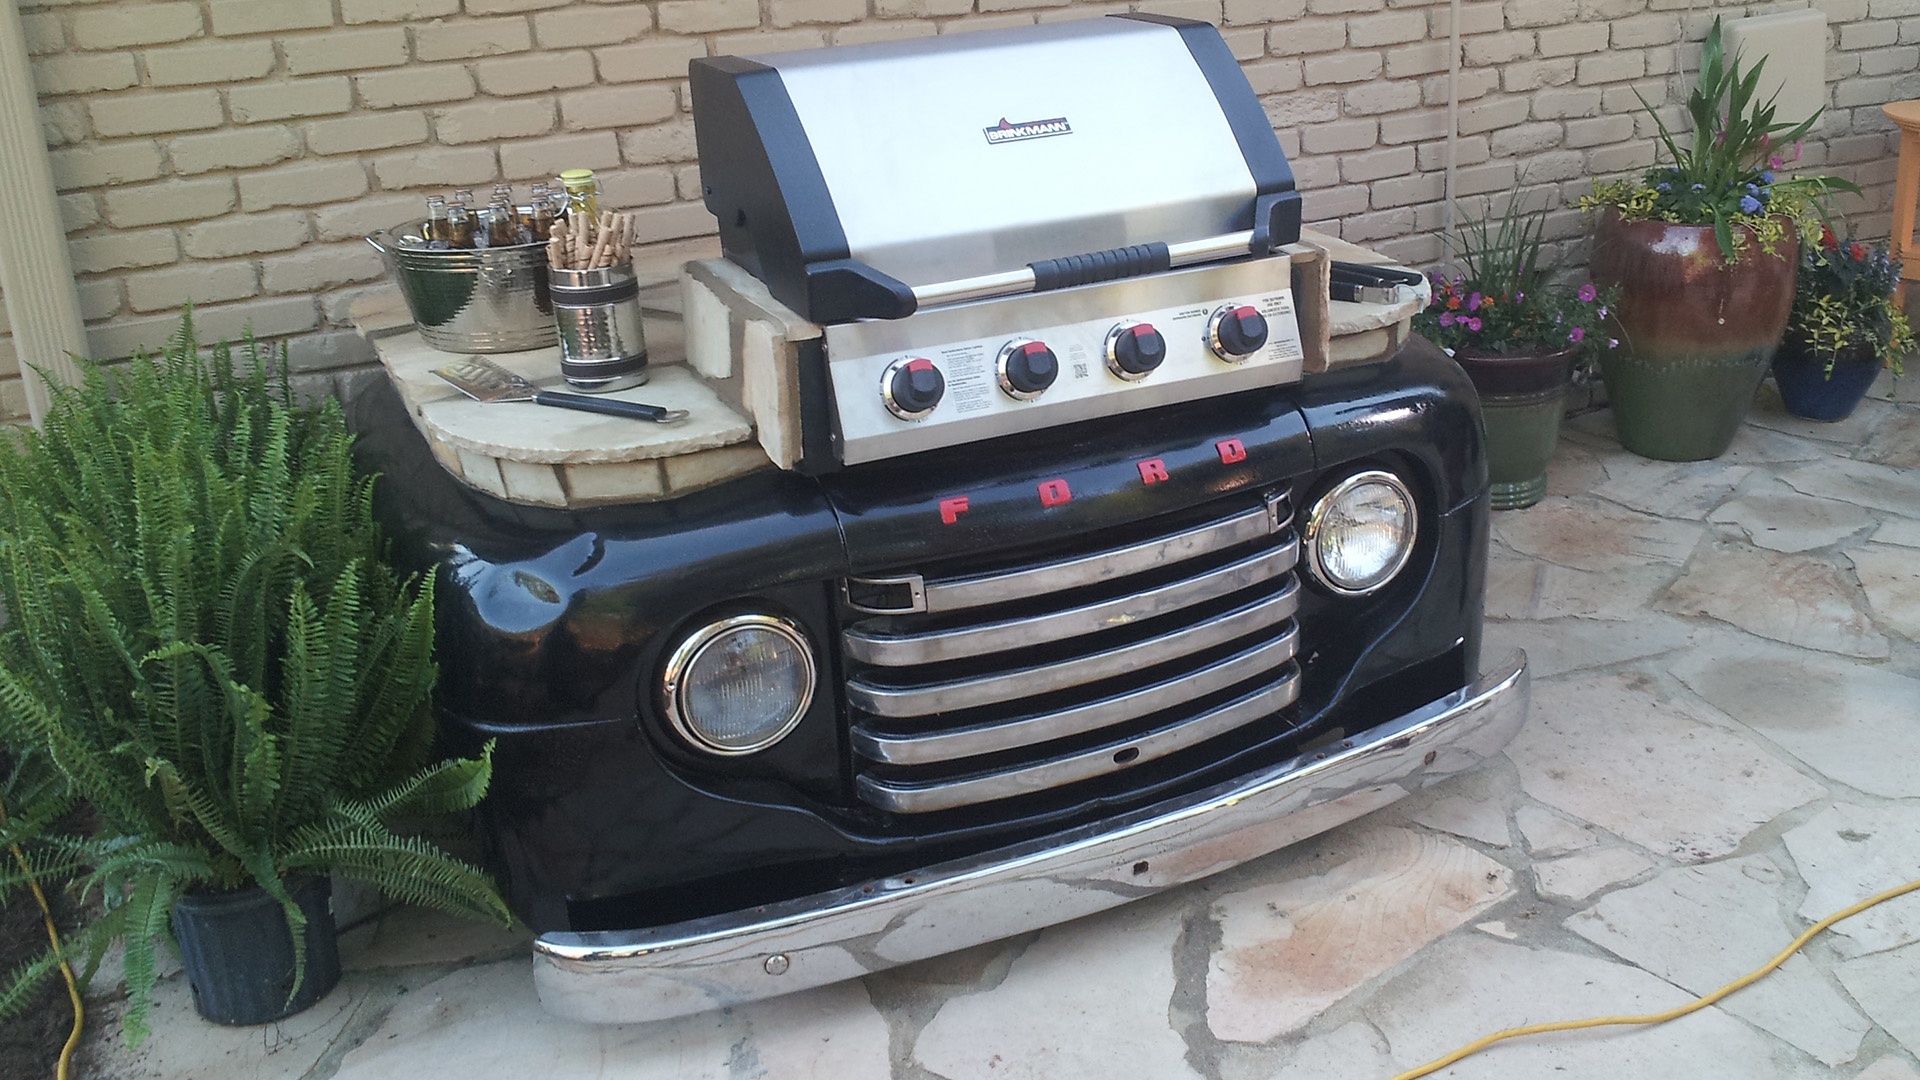 Residential landscaping. Outdoor kitchen with retro car front end